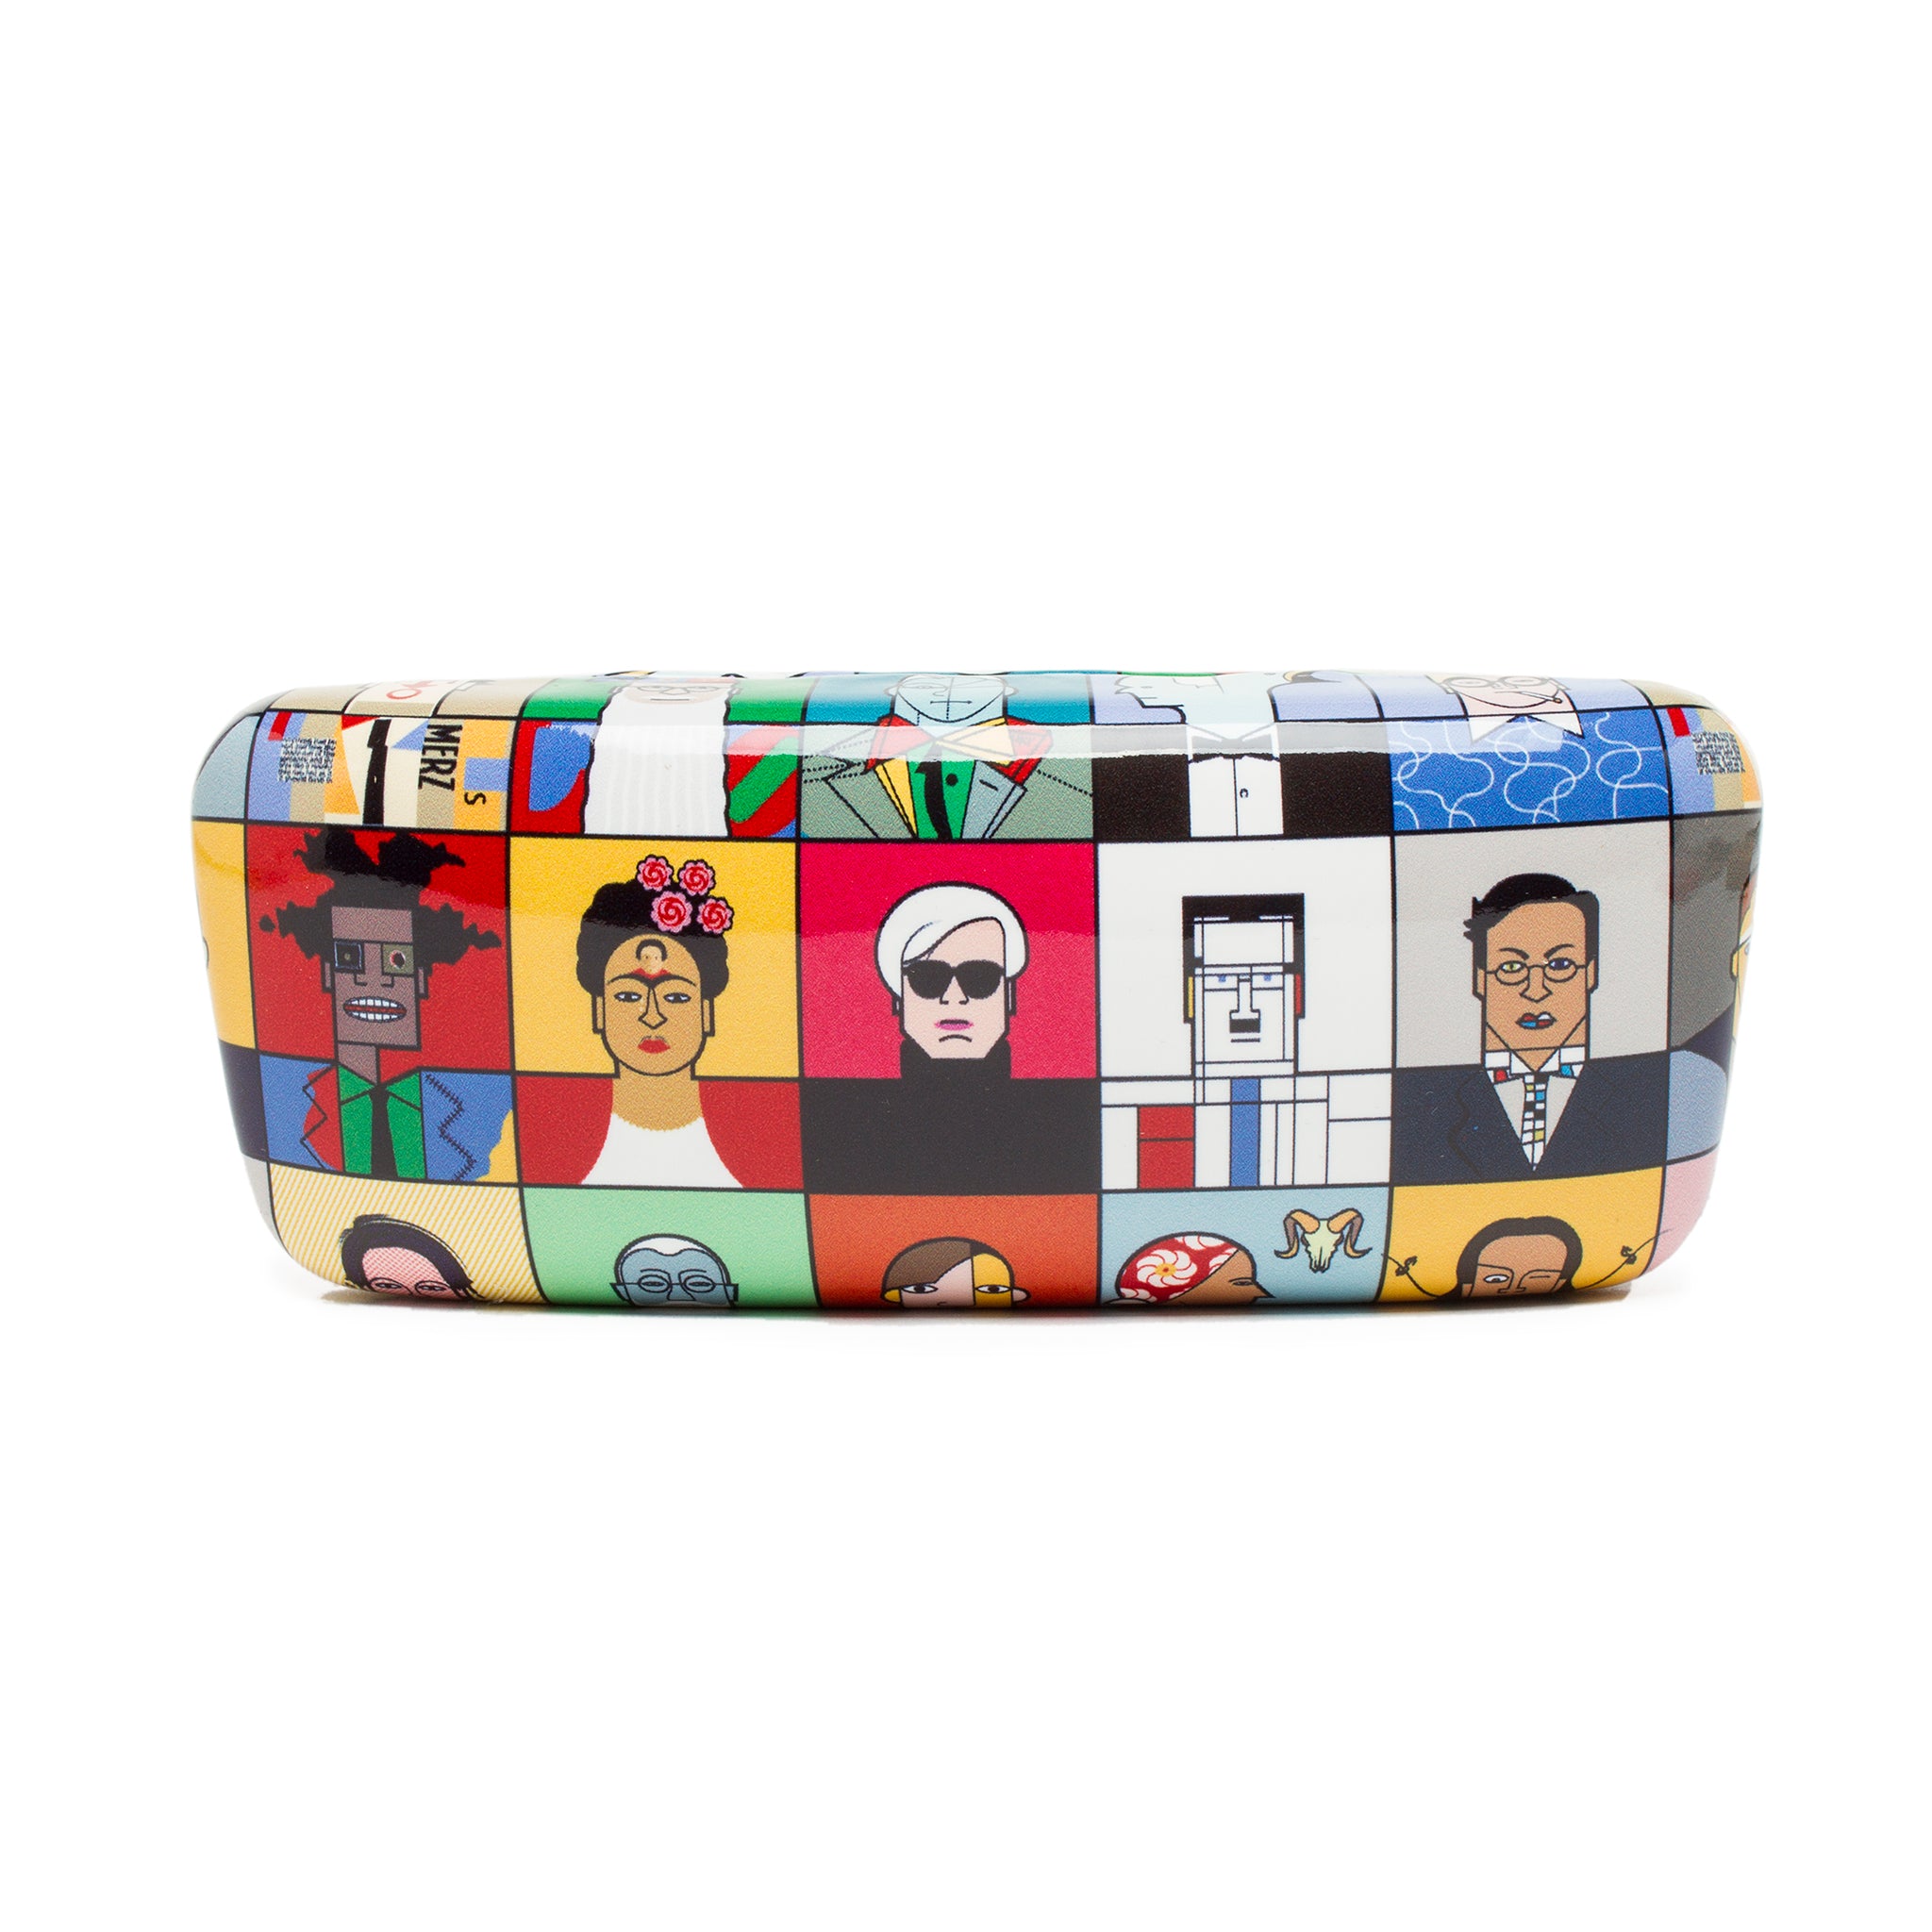 The Eyewear Case Is Designed in a Fashionable and Colorful Way. It Is Made  of Monogram Canvas and Vvn Leather to Protect Valuable Sunglasses From  Scratches - China Glasses and Sunglasses price